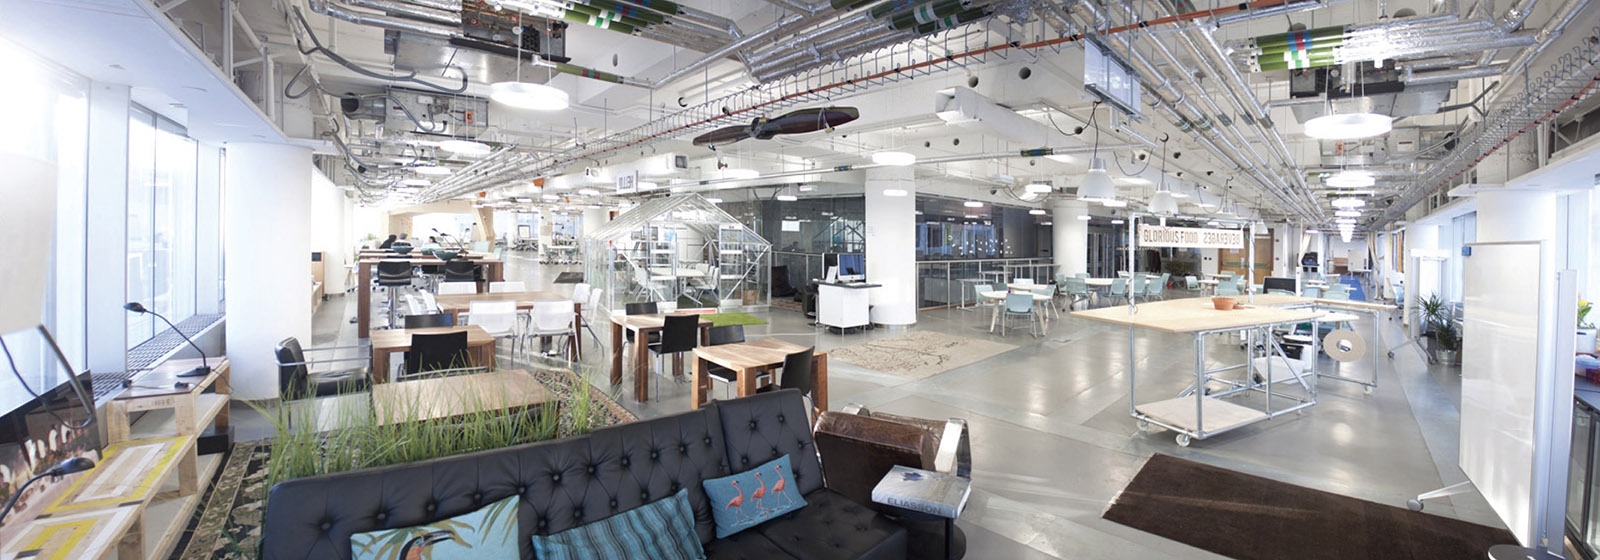 Impact Hub Westminster in central London